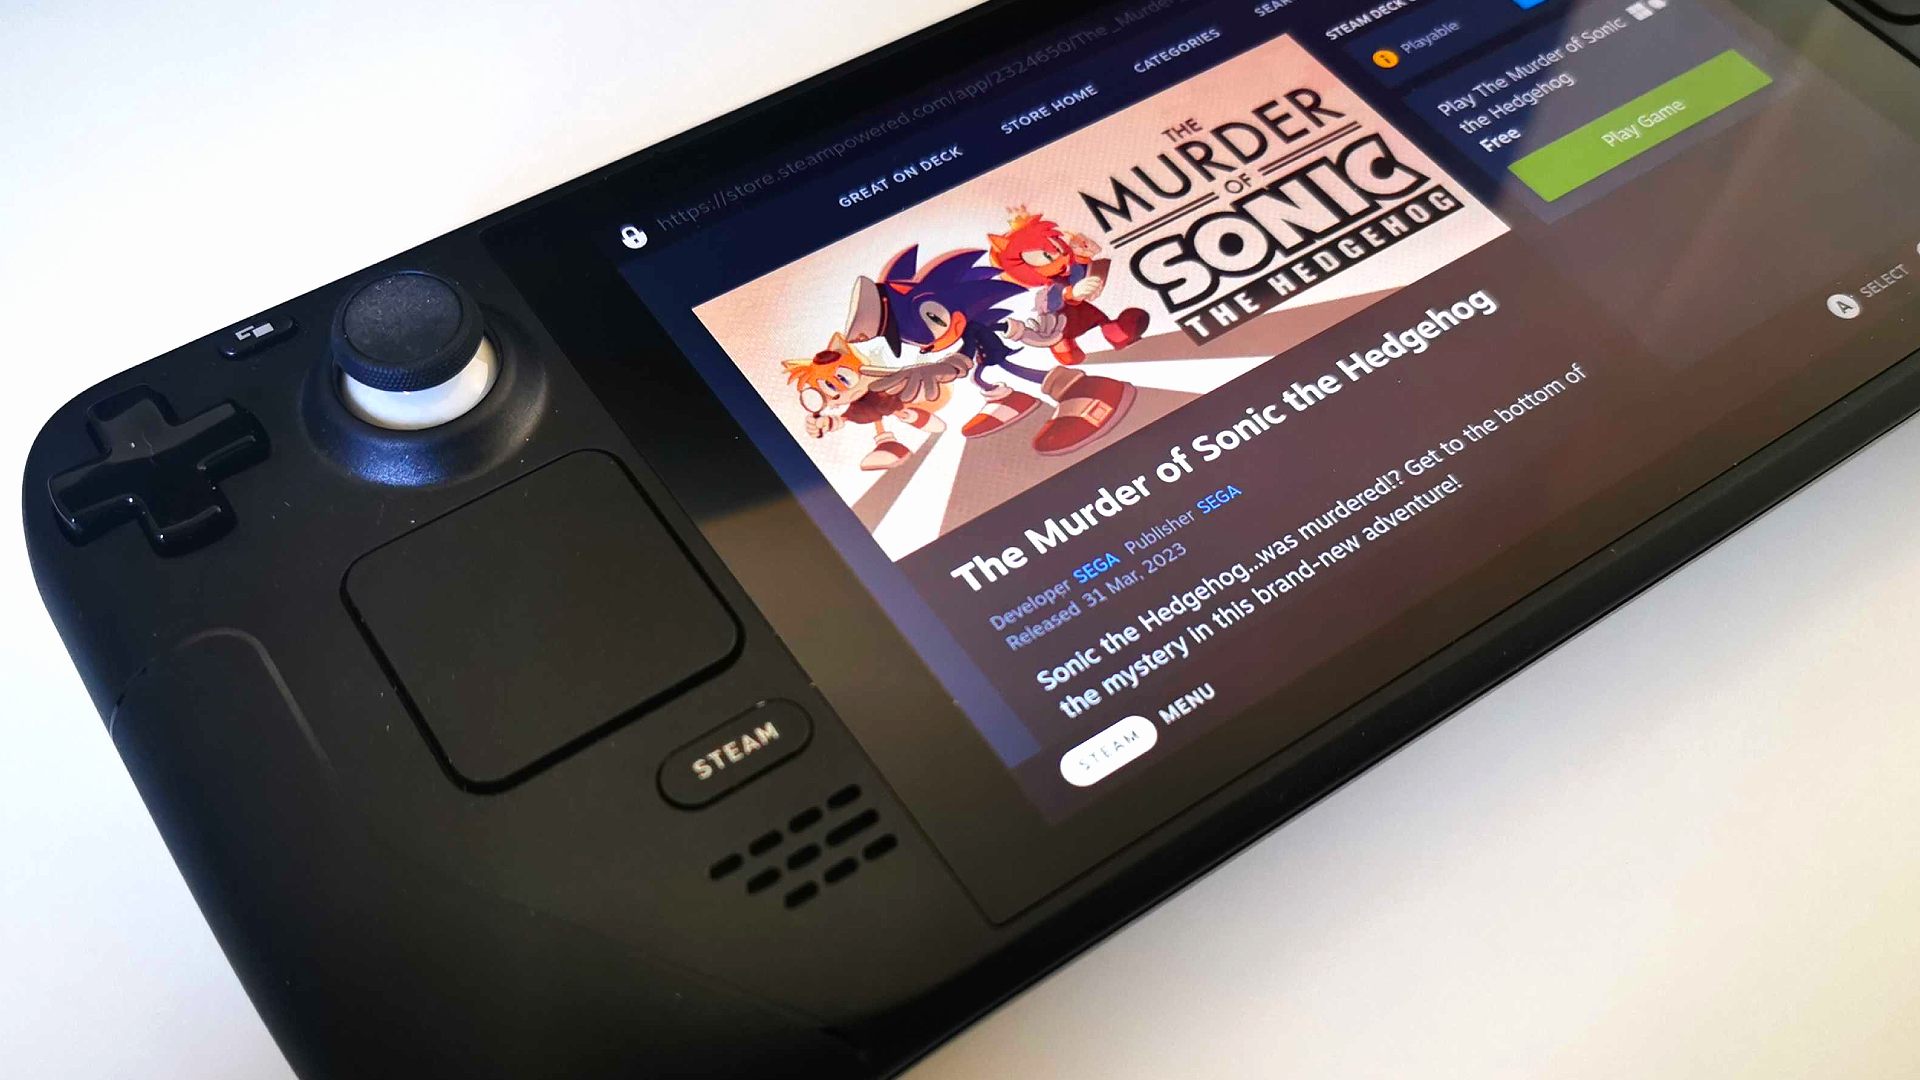 The Murder of Sonic the Hedgehog Steam Deck: Storefront page on handheld's screen